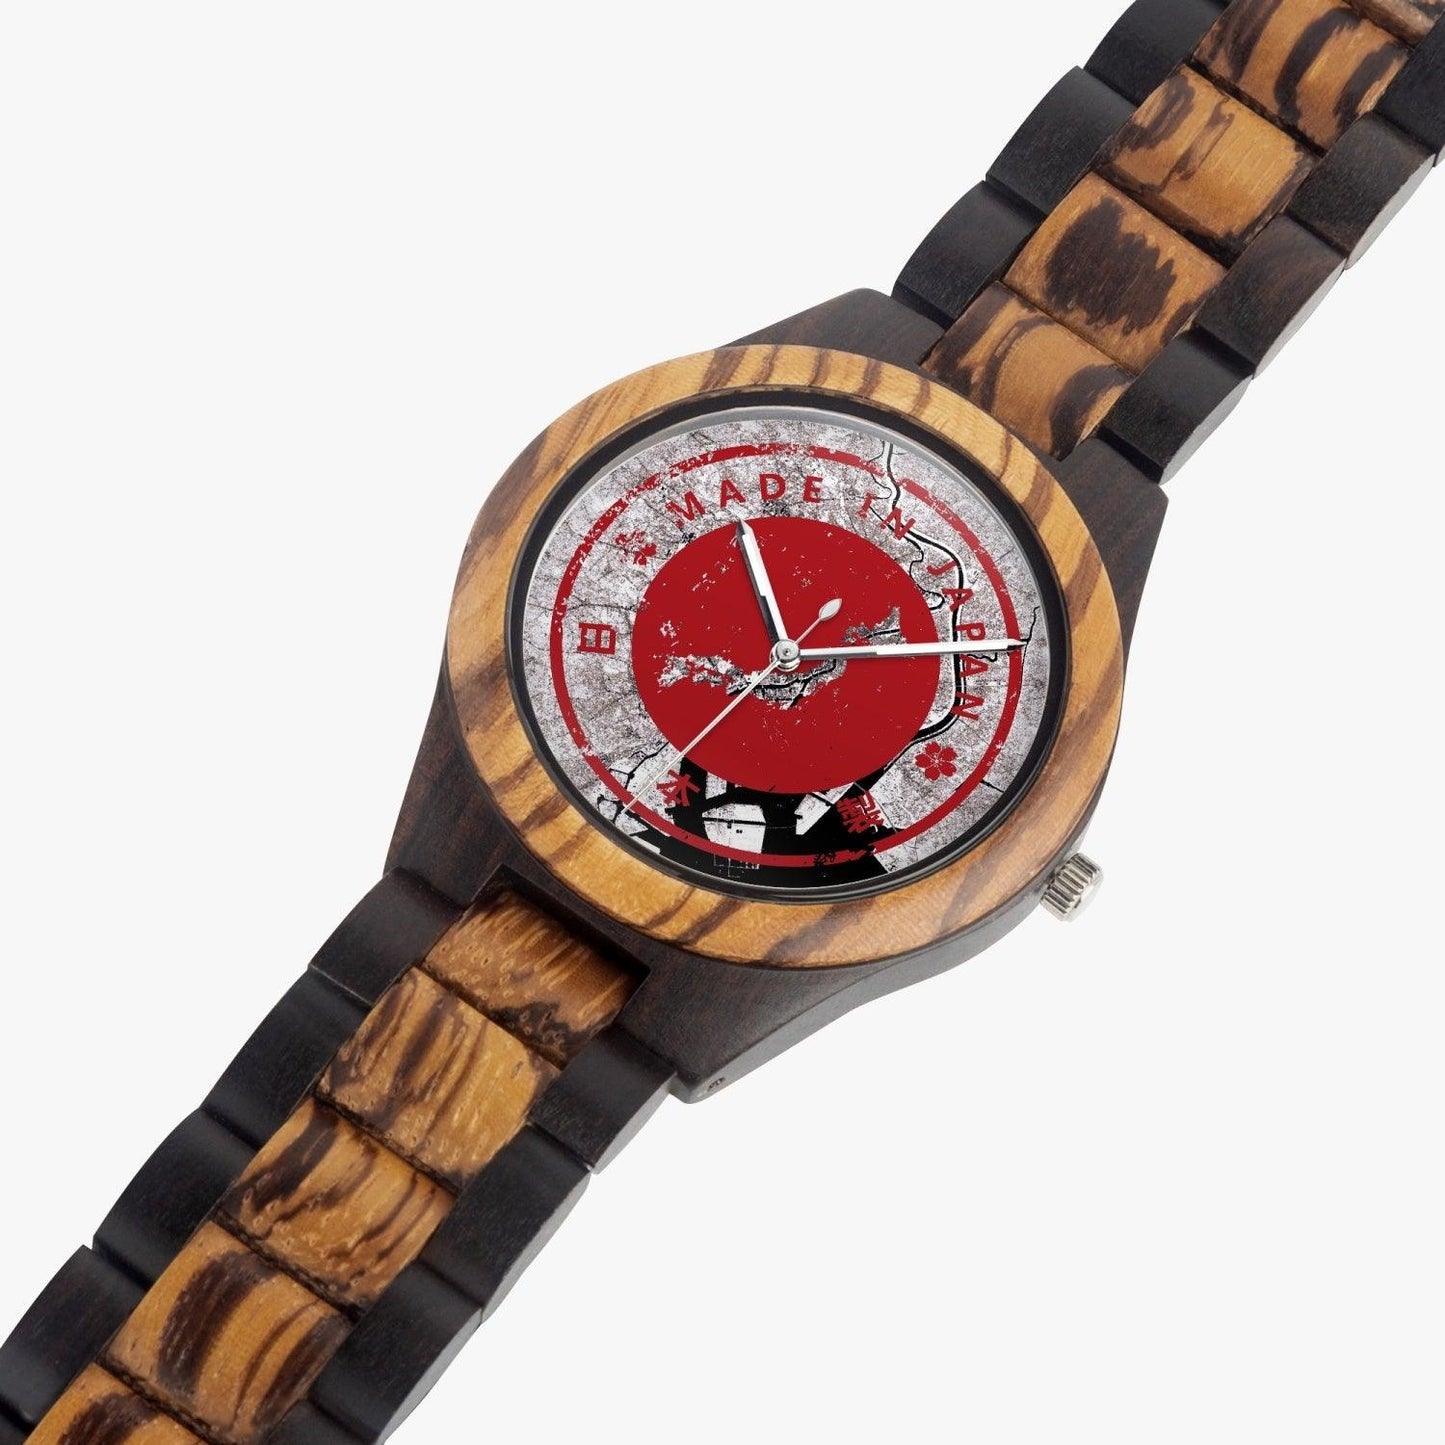 "Made In Japan" Wooden Watch